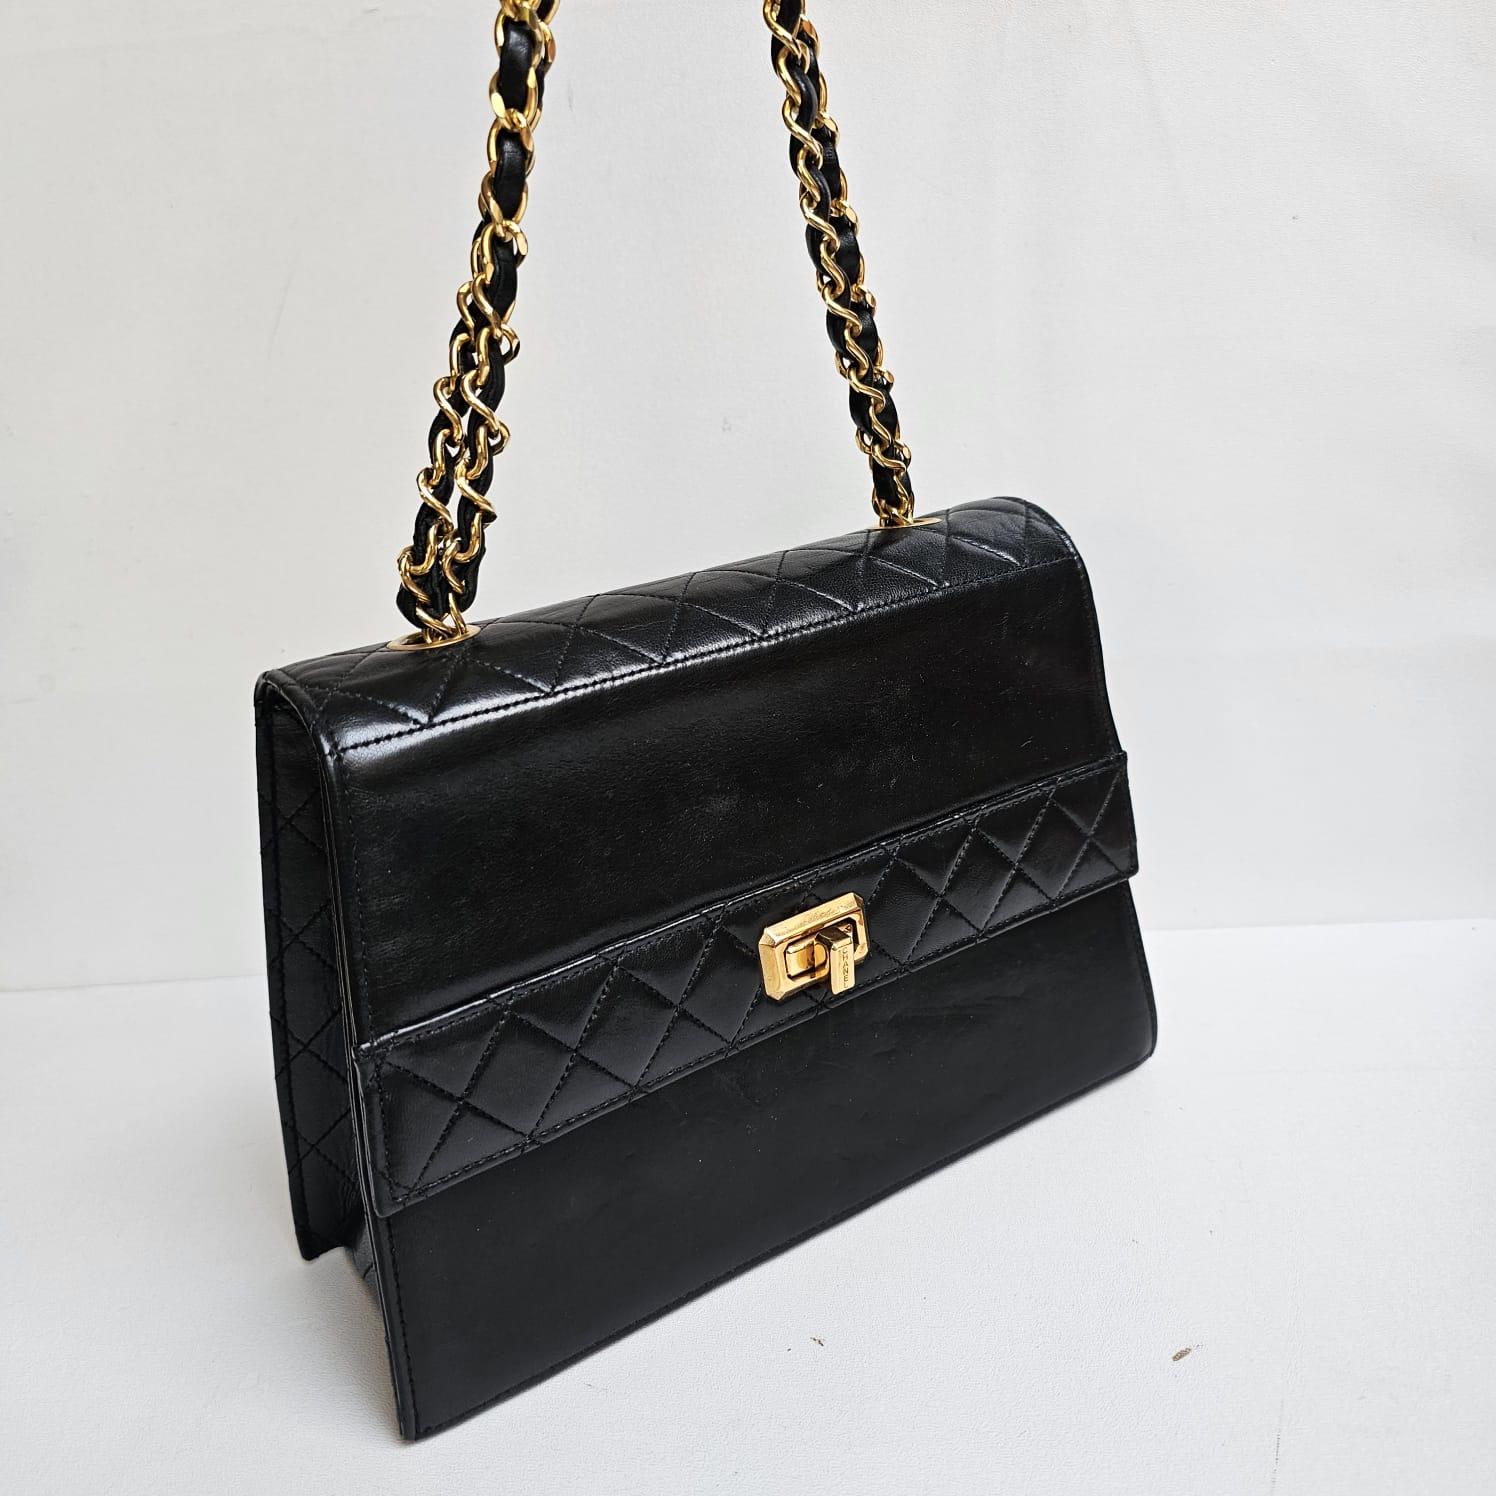 Beautiful trapezoid vintage shoulder bag in black lambskin leather. Overall in good condition, with faint nail marks and scratches. Minor touch ups has been done to lightly cover the marks. Comes with the small wallet. Series #1. Holo has darkened